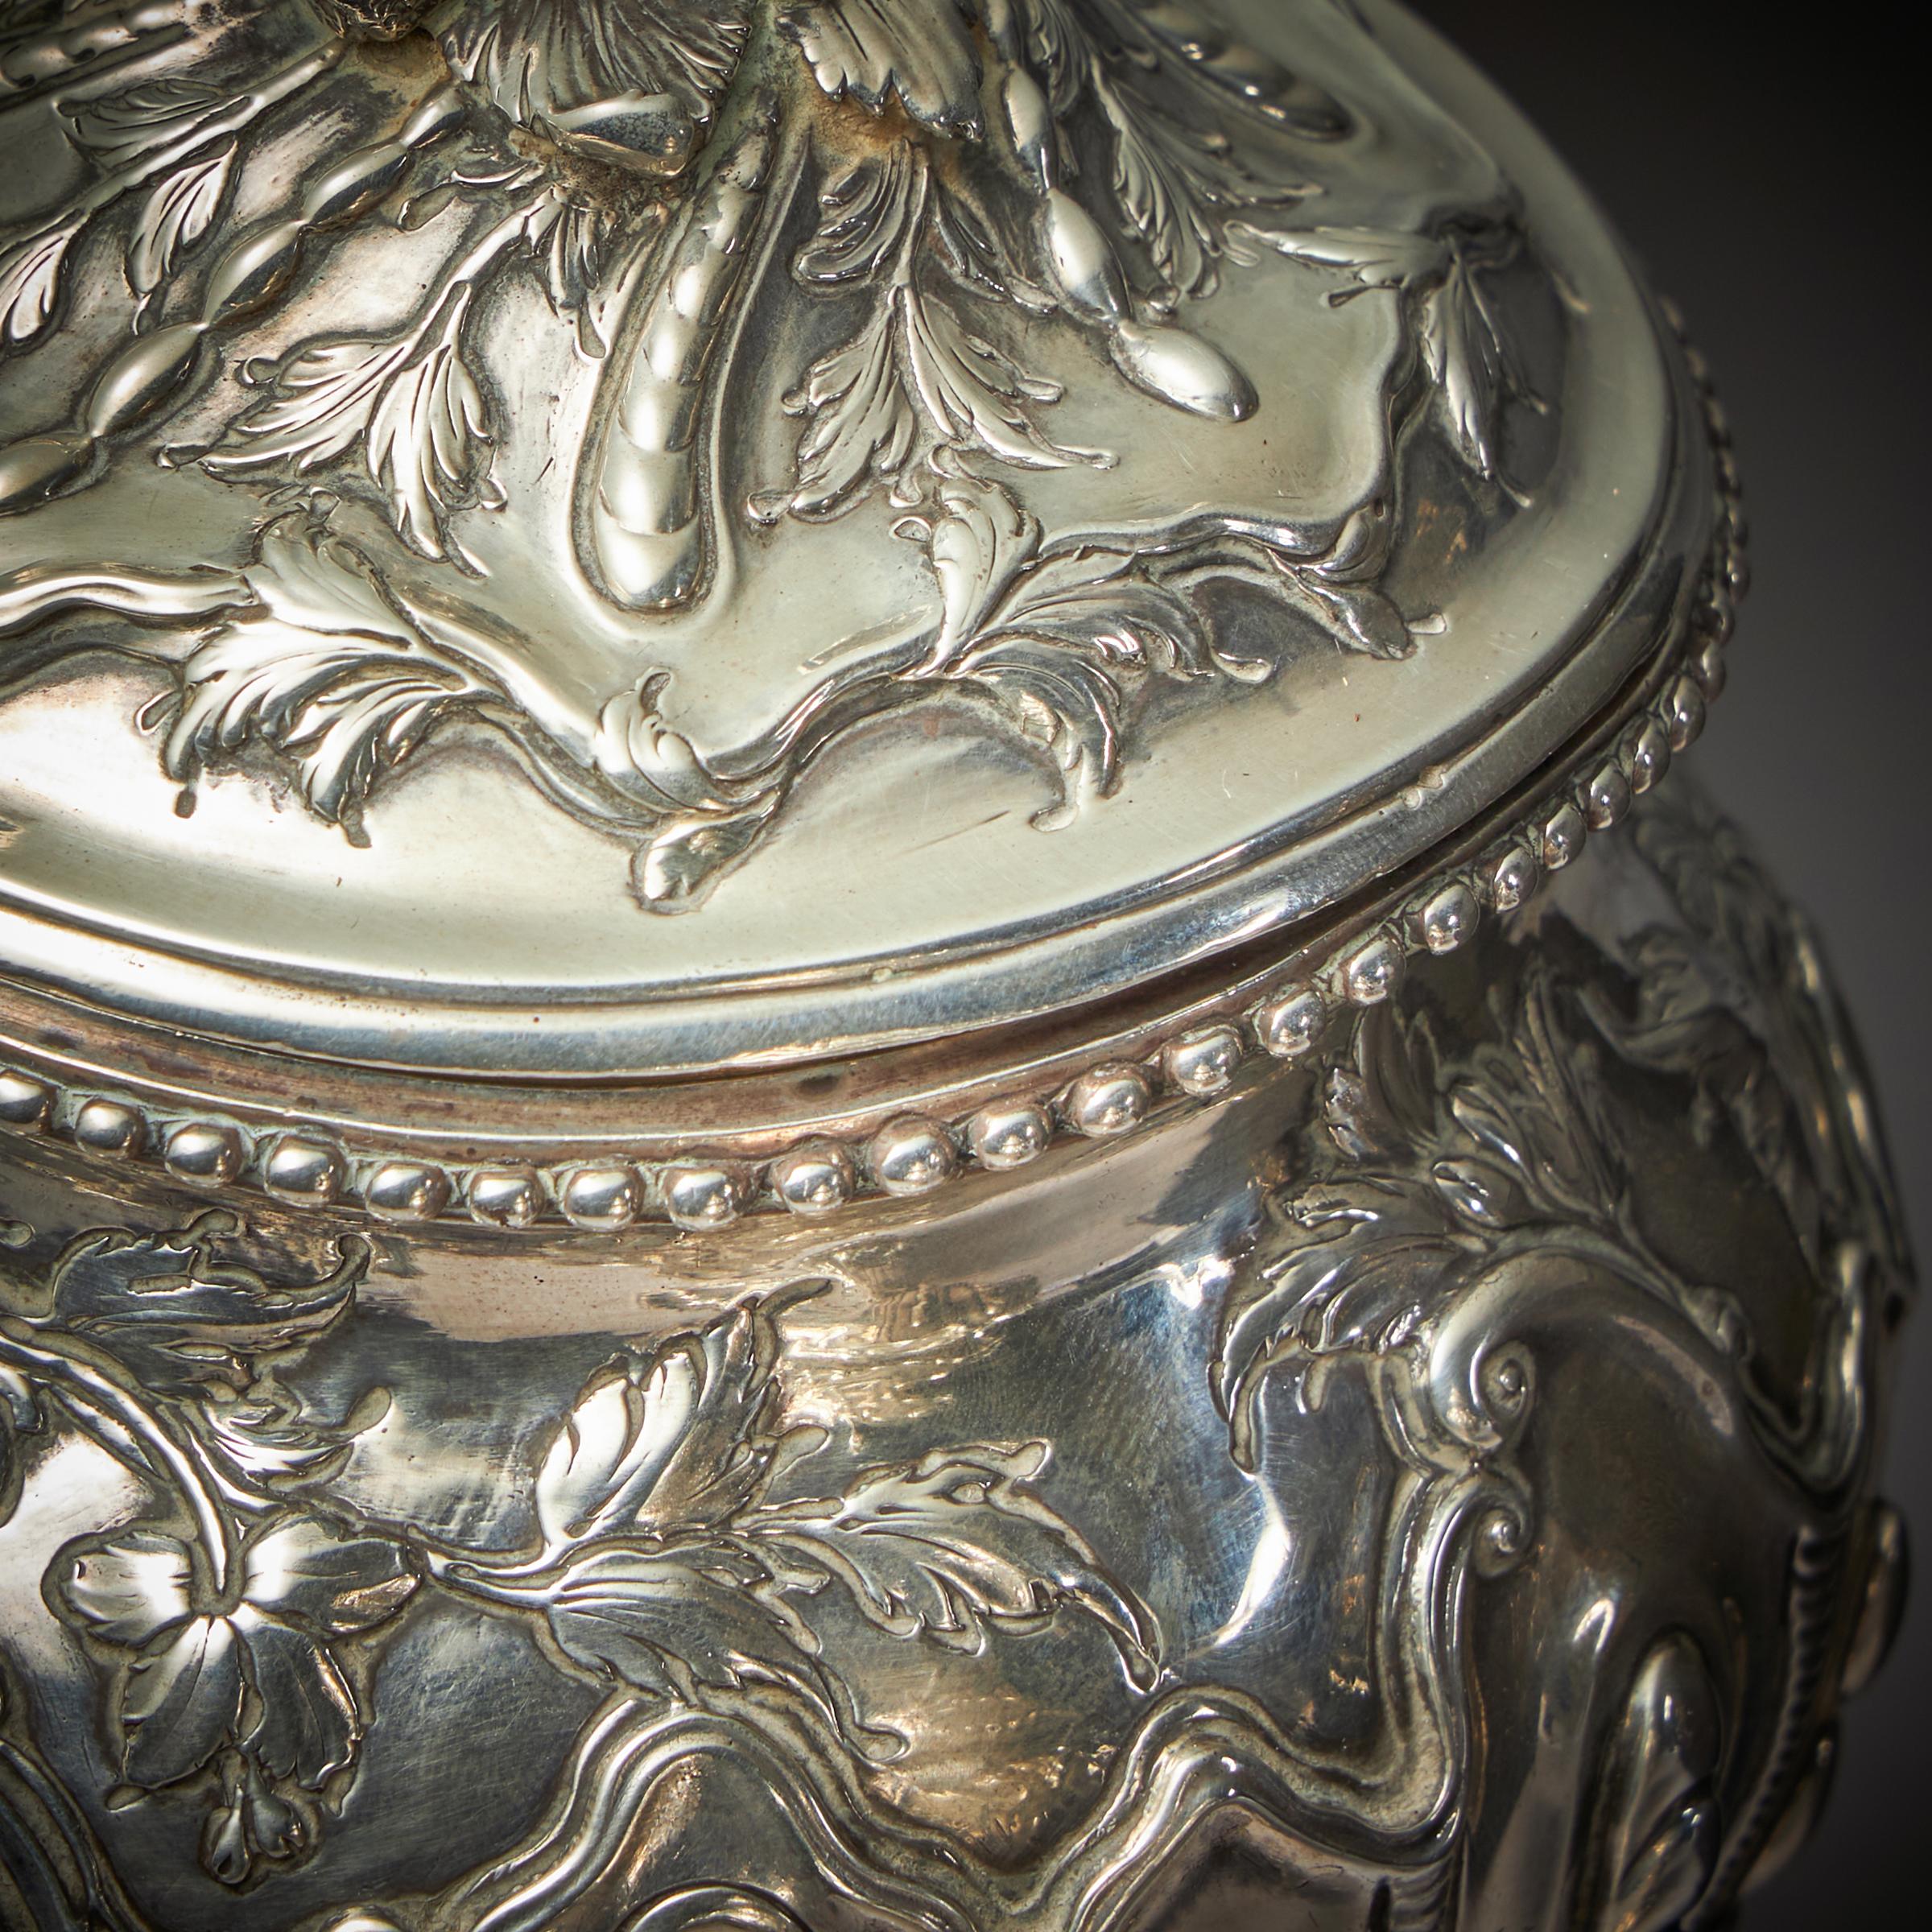 A Rare Silver Mounted George II Shagreen Tea Caddy with Silver Rocco Canistors-17